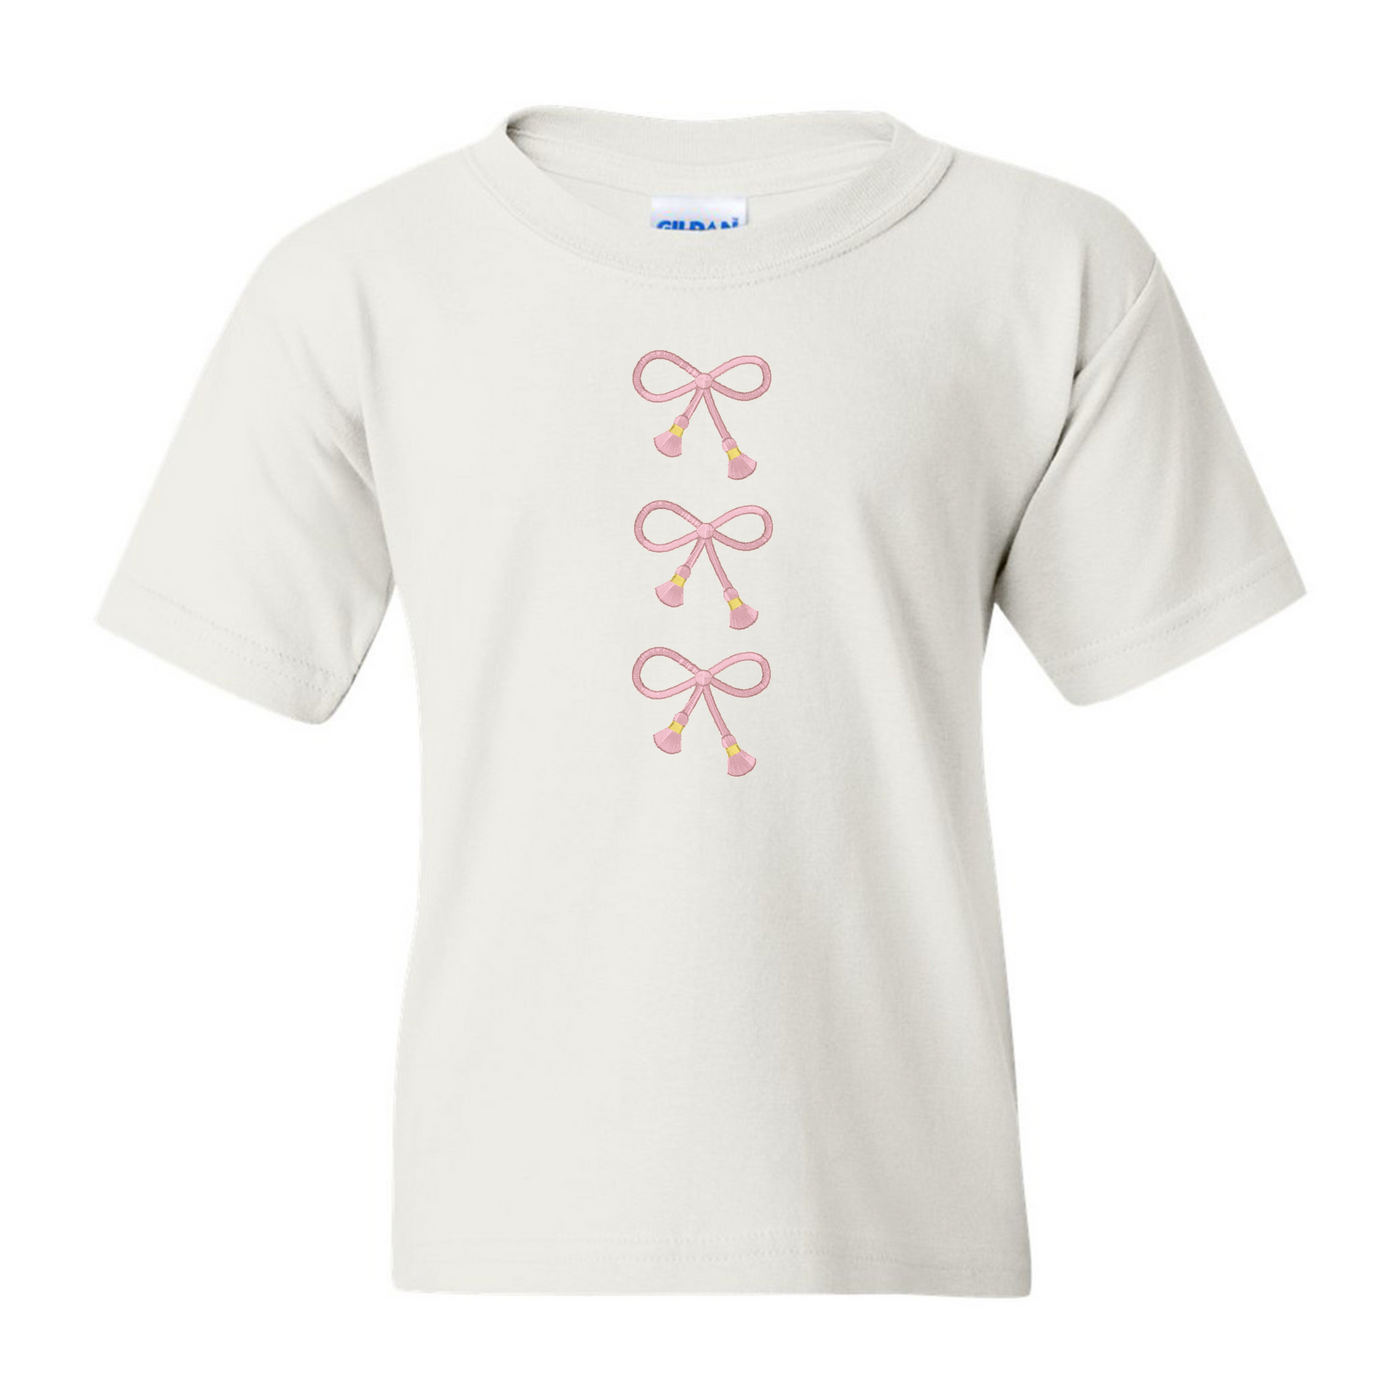 Kids Embroidered Tasseled 'Bows' T-Shirt